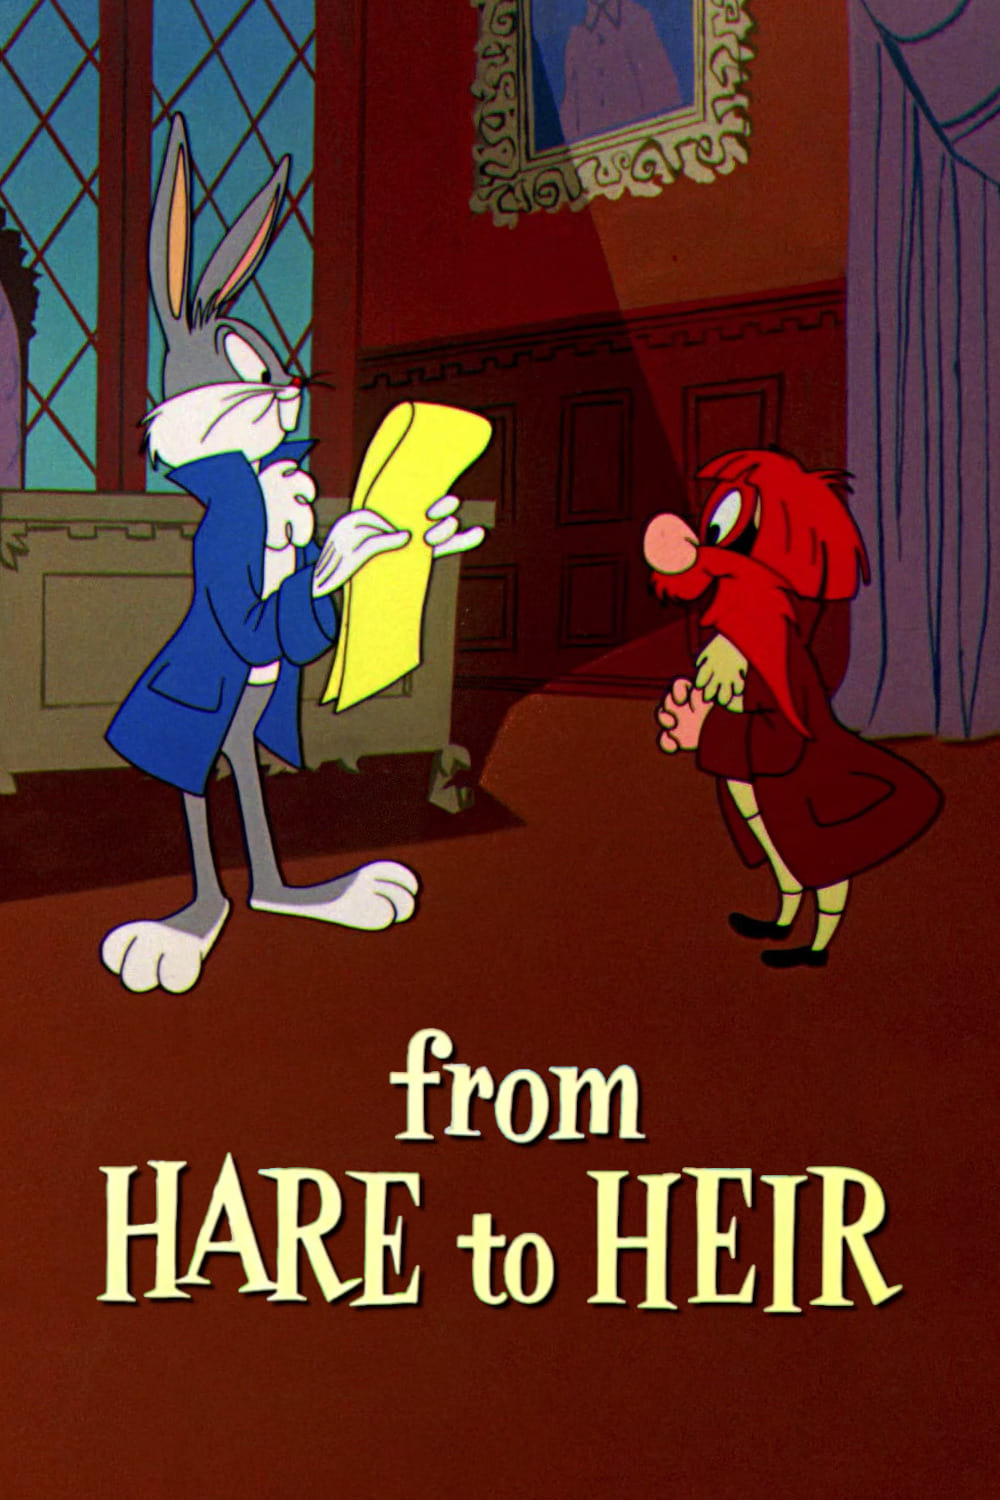 From Hare to Heir (1960)